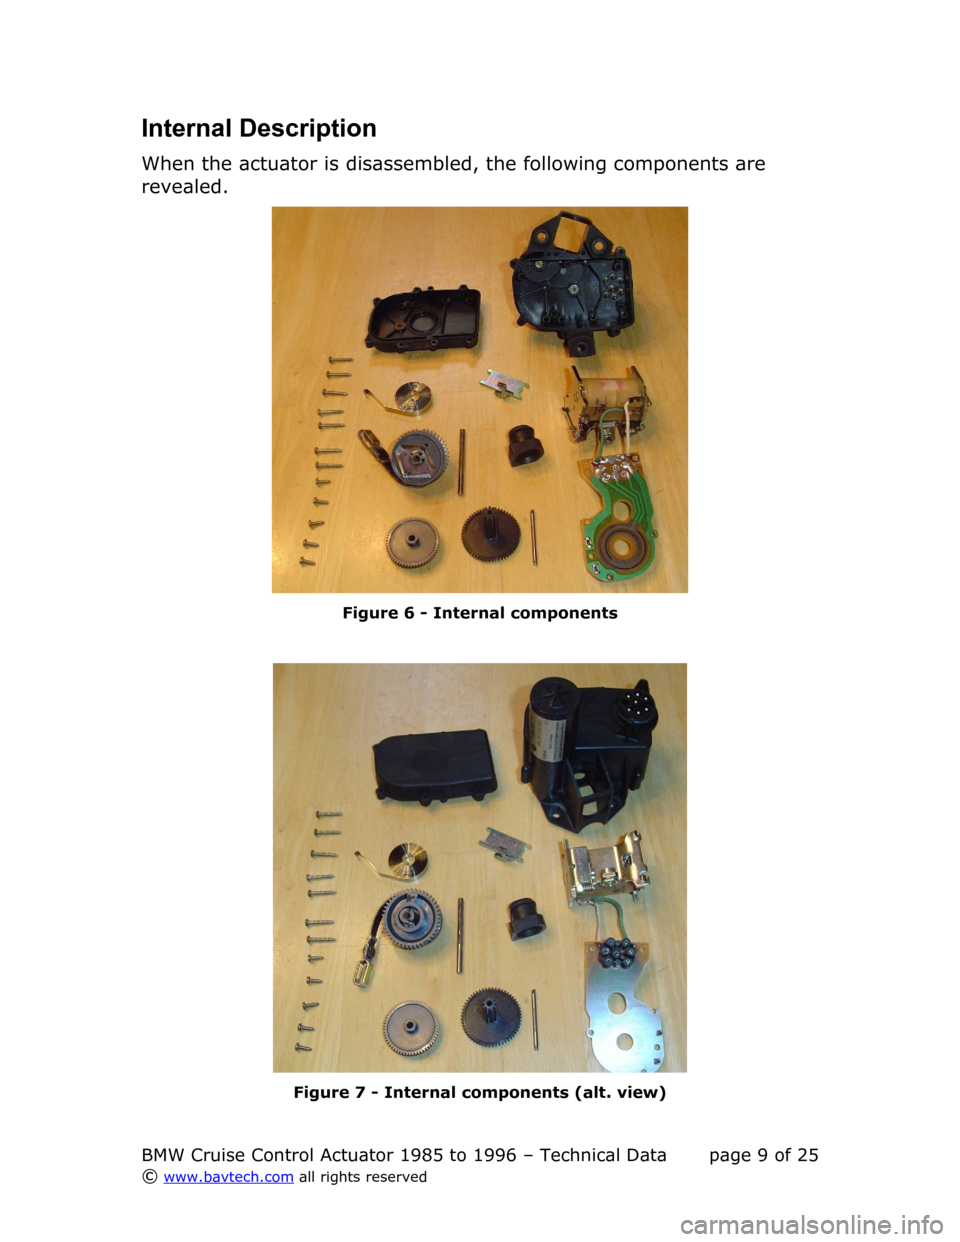 BMW 3 SERIES 1995 E36 Cruise Control Acutator Internal Description
When the actuator is disassembled, the following components are  
revealed.
Figure  6  - Internal components
Figure  7  - Internal components (alt. view)
BMW Cruise Control Actuat